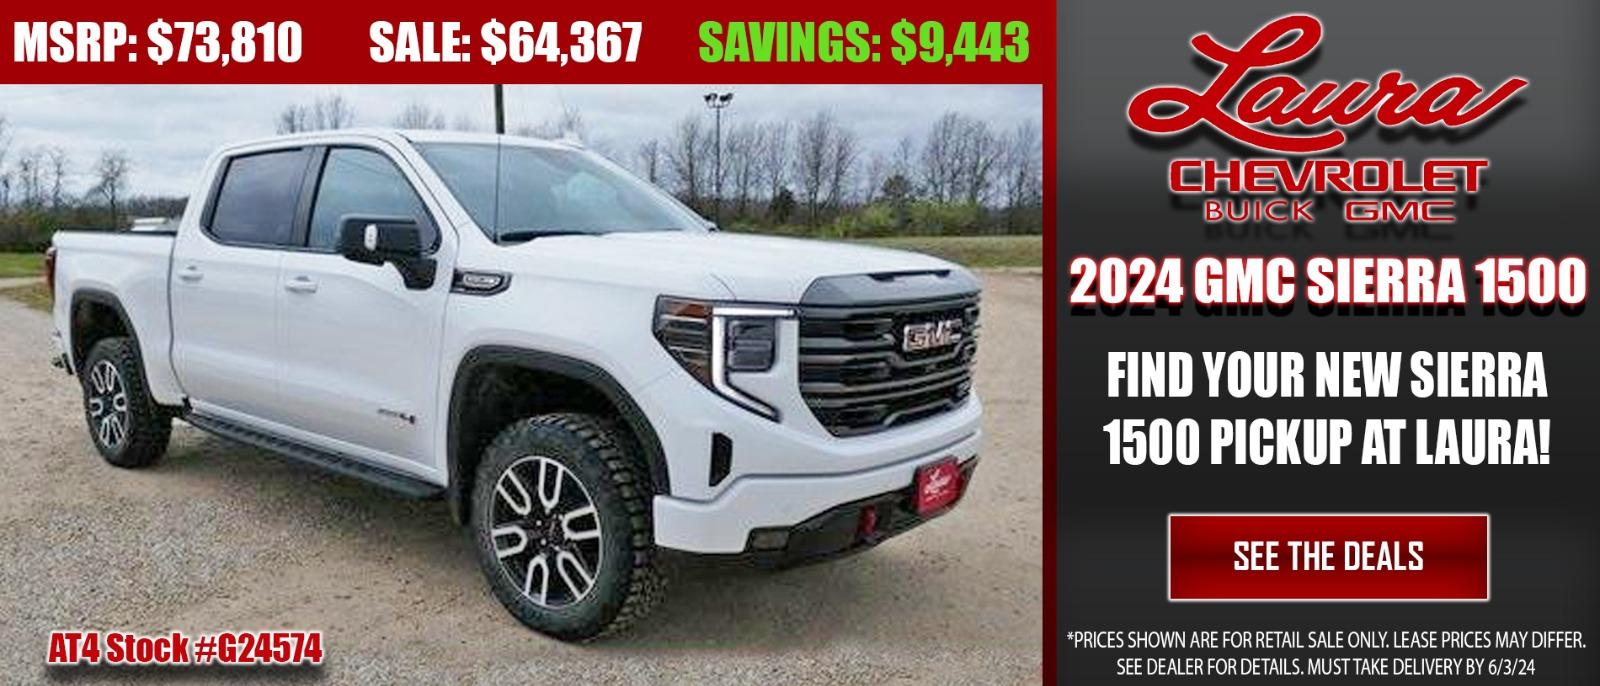 Find or order your new 2023 GMC Sierra 1500 pickup this month at Laura Chevrolet Buick GMC!